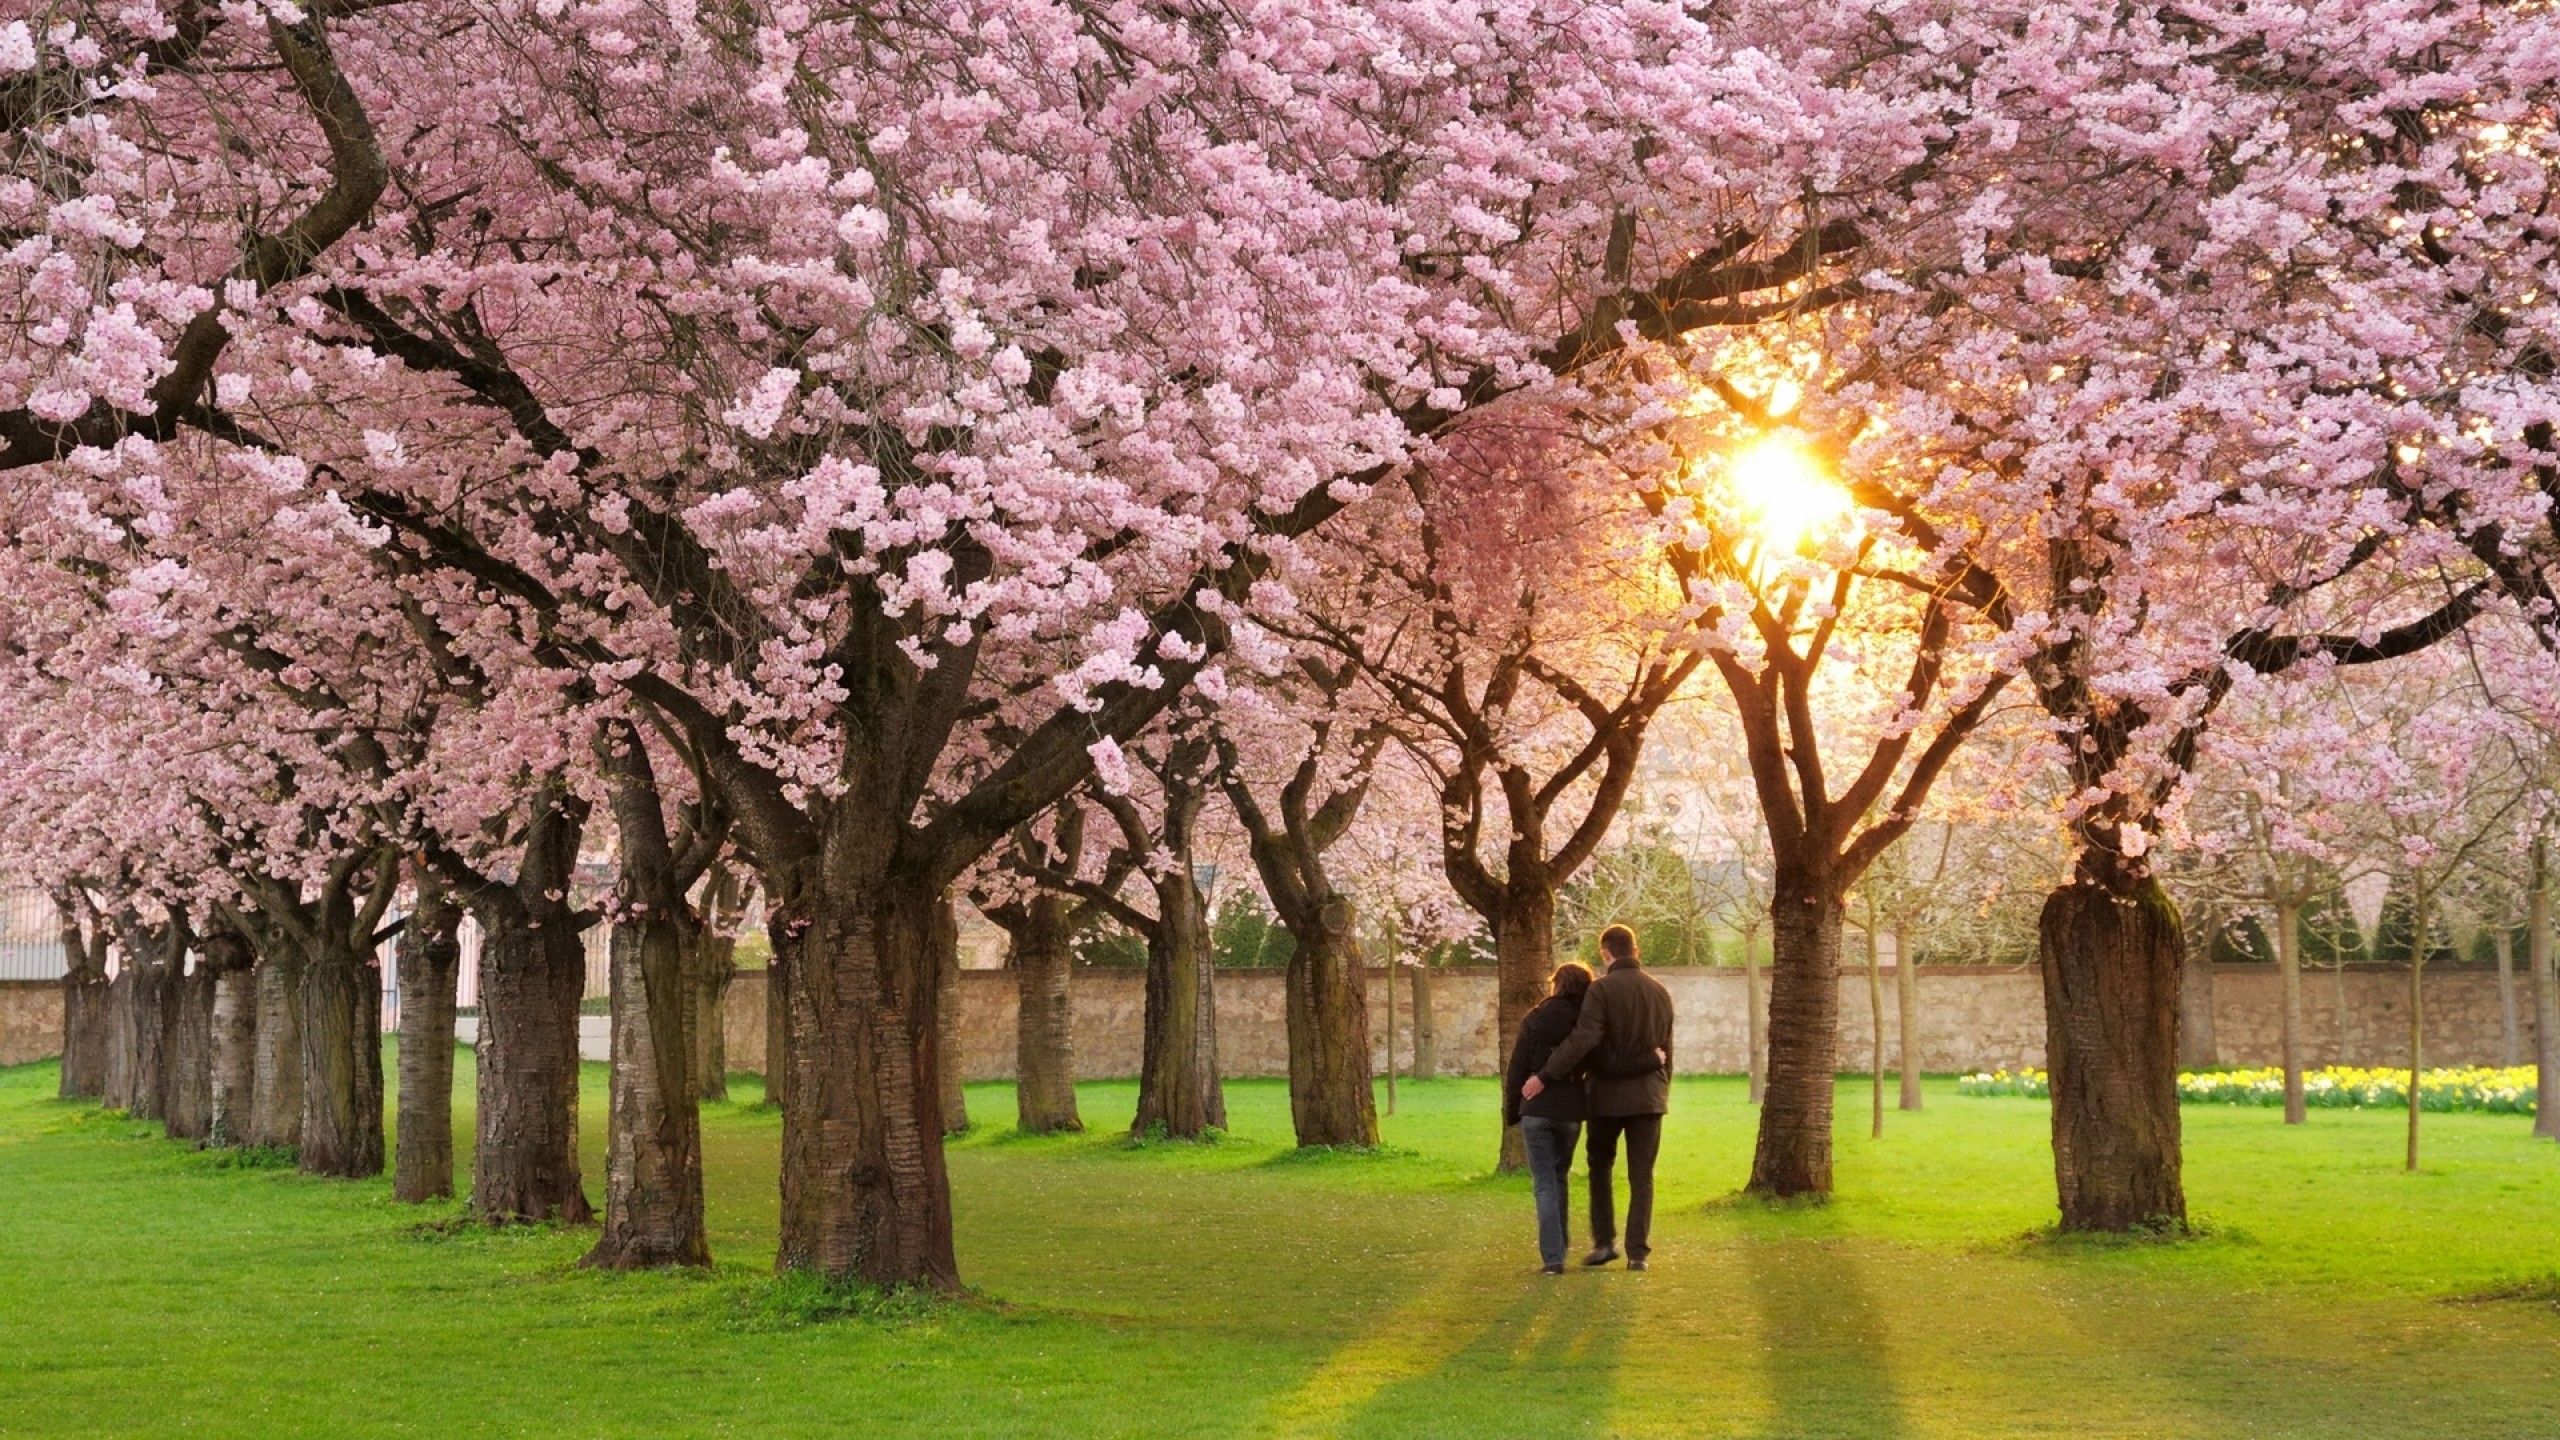 Download 2560x1440 Orchard, Tree, Couple, Sunset, Blossom, Pink